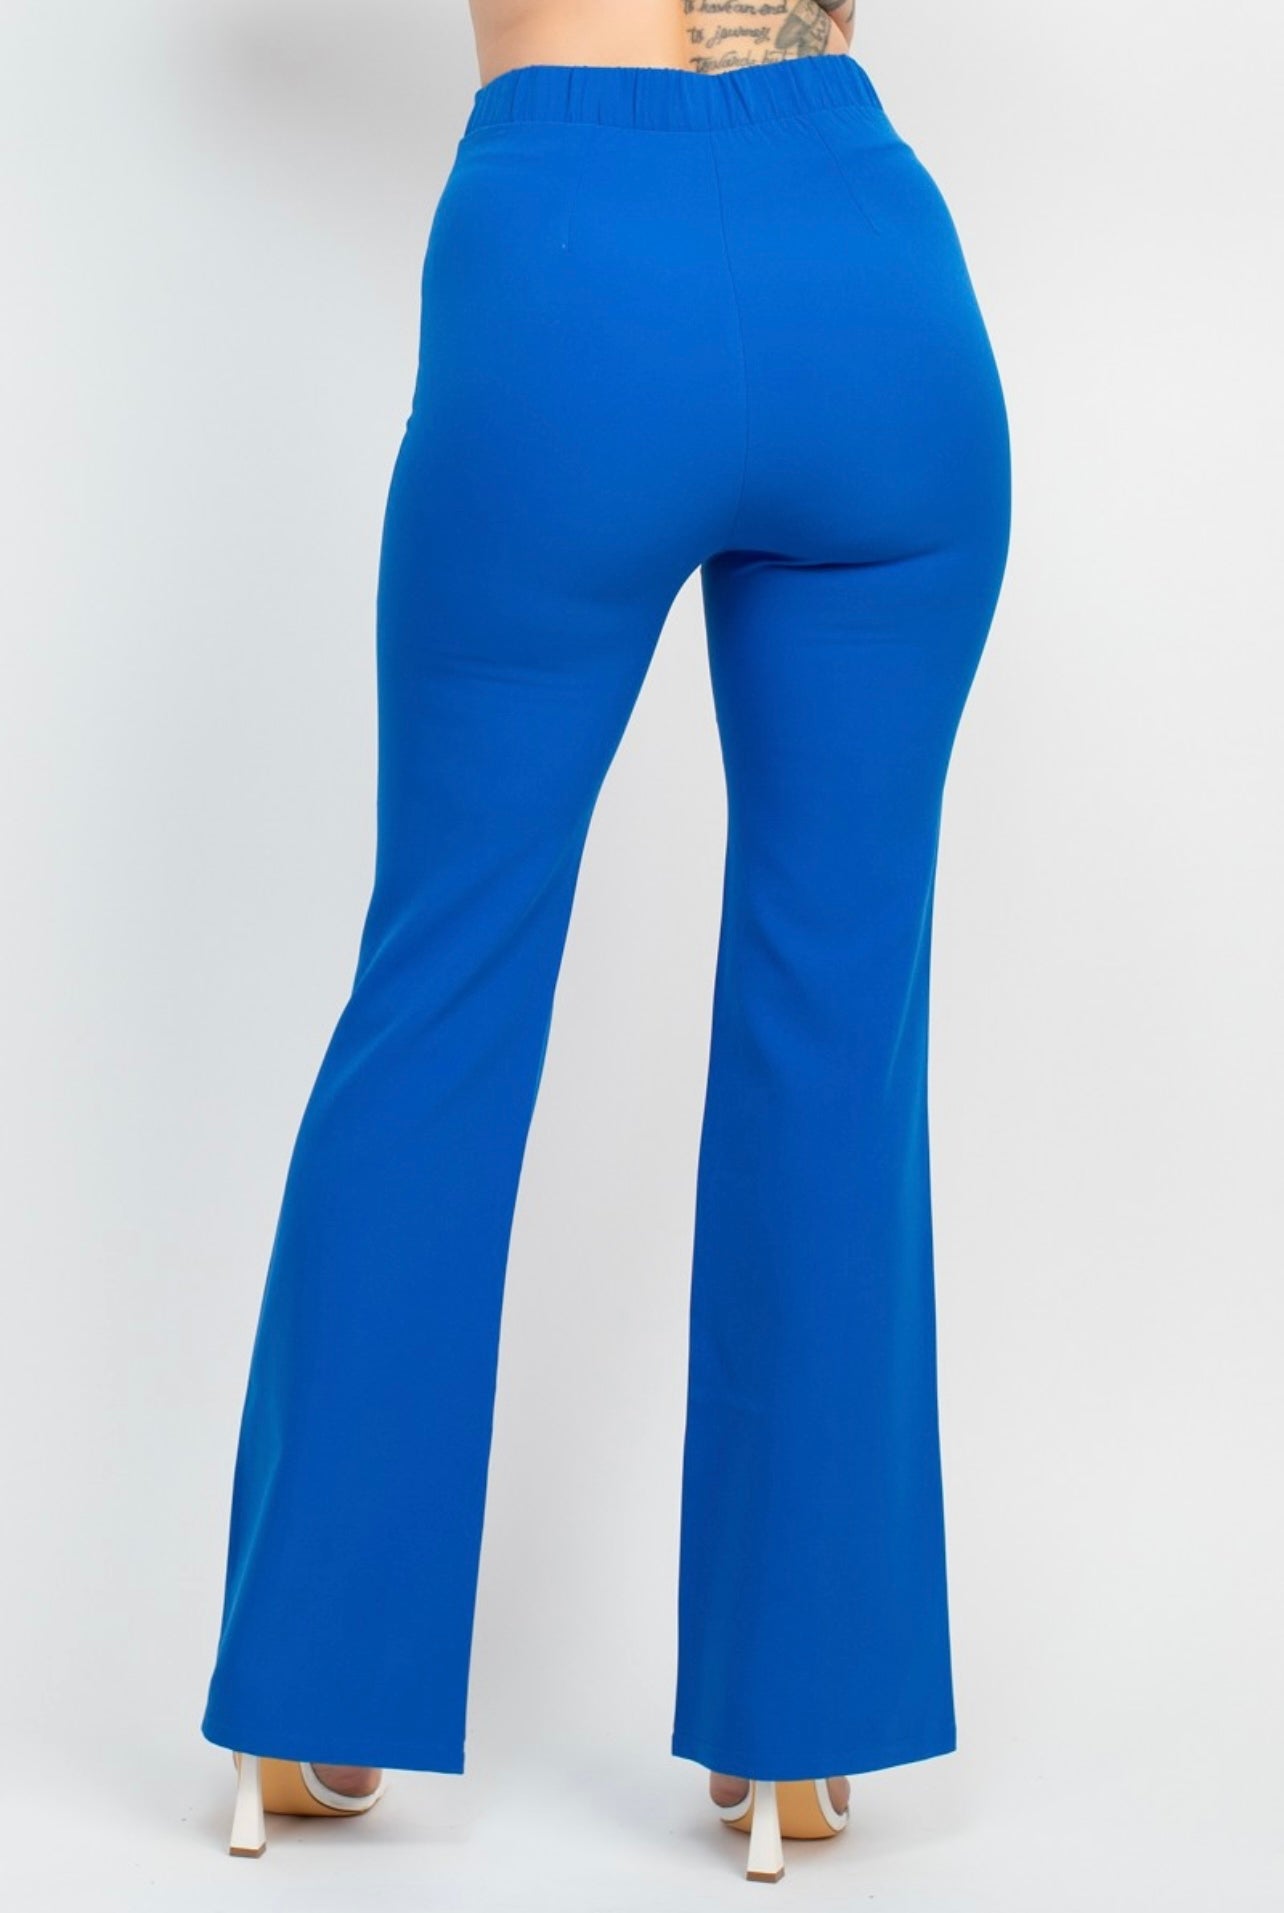 Lexy Fit Flare Pants (Royal)